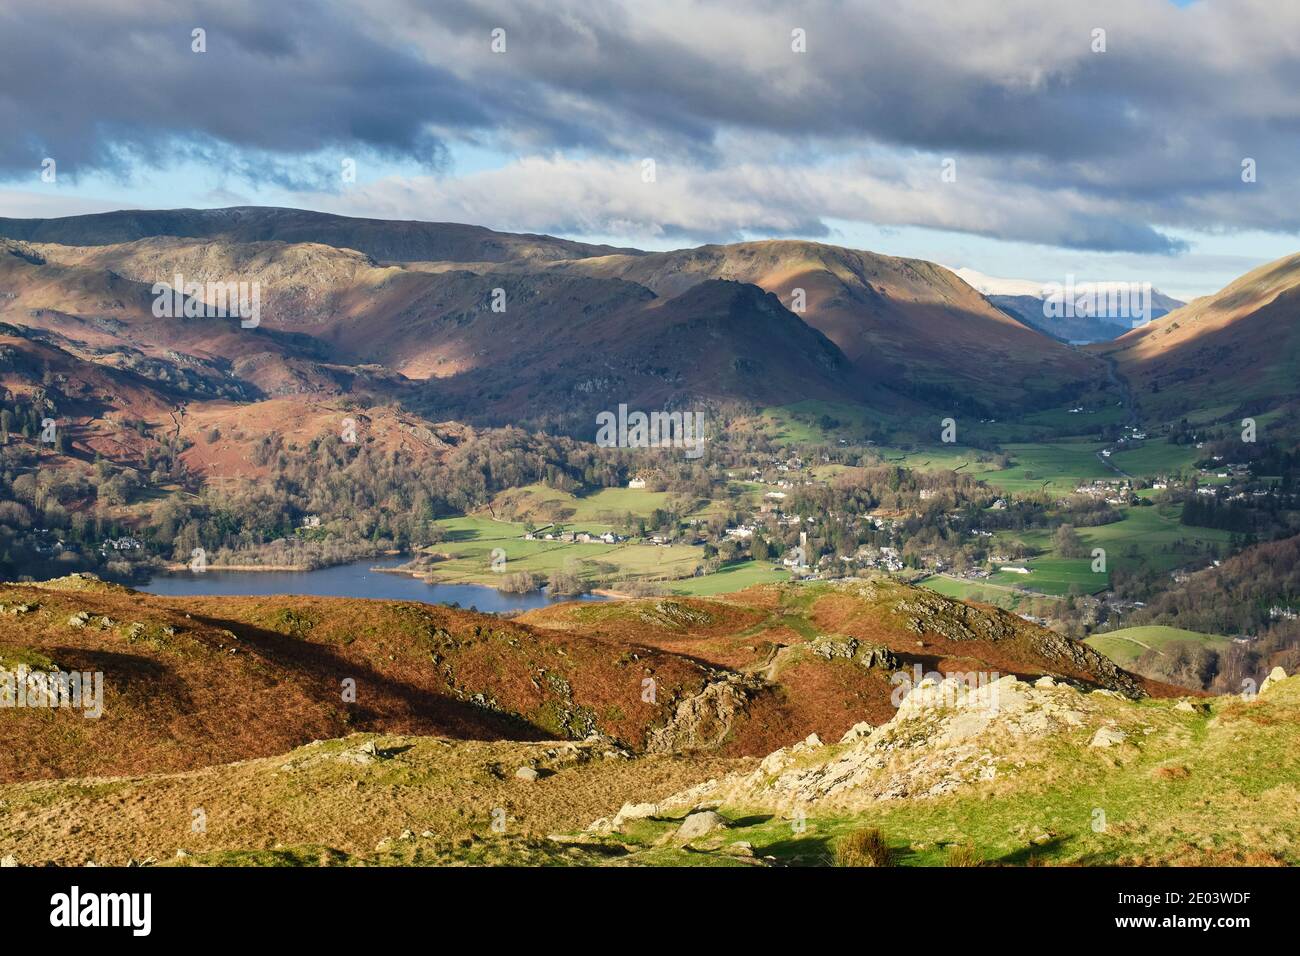 Ulscarf, Steel Fell, Gibson Knott, Helm Crag, Dunmail Raise and Grasmere seen from Loughrigg Fell, Grasmere, Lake District, Cumbria Stock Photo